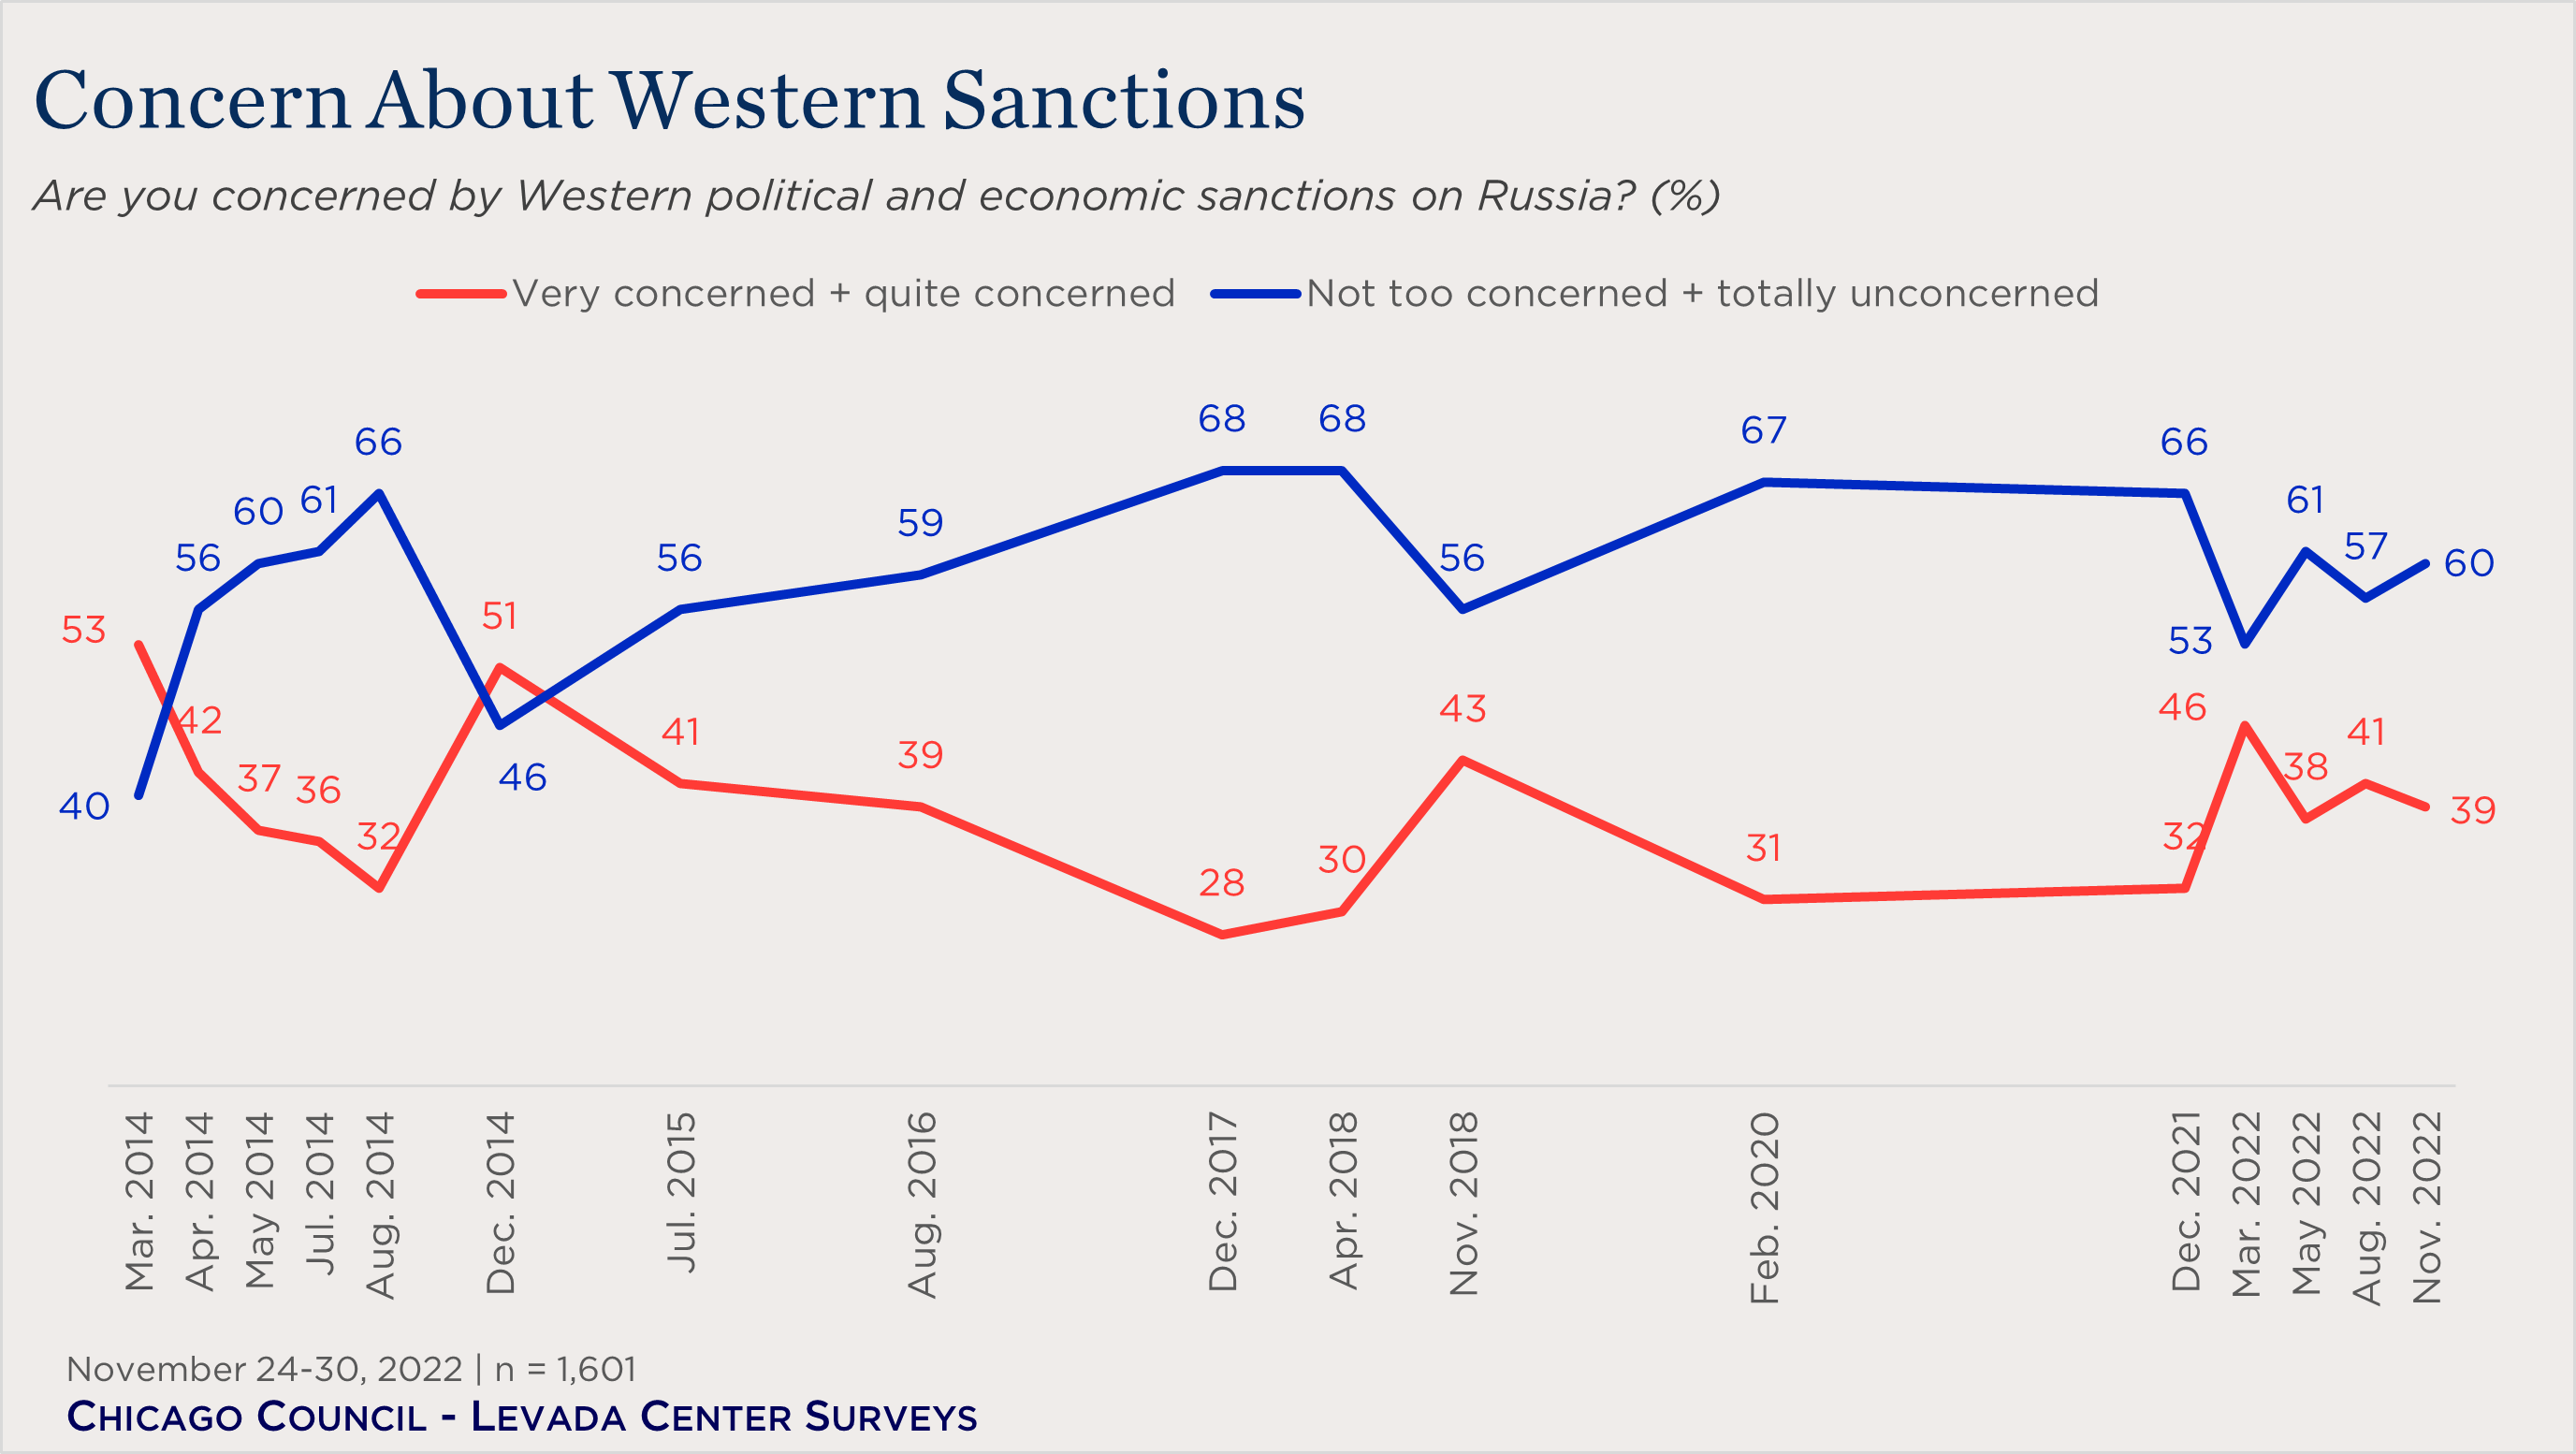 line chart showing Russian concern about Western sanctions over time